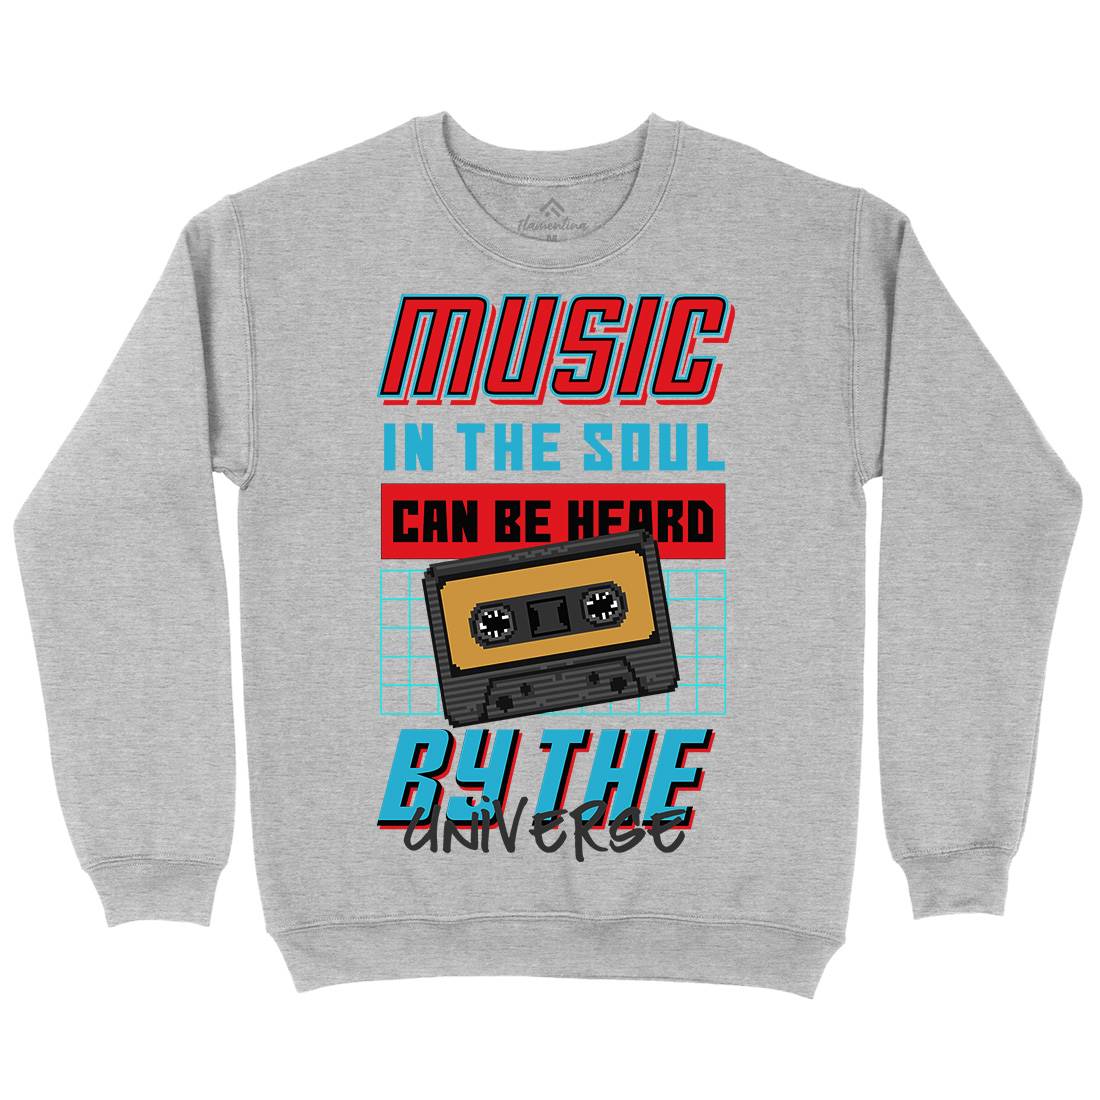 In The Soul Can Be Heard By The Universe Kids Crew Neck Sweatshirt Music B935